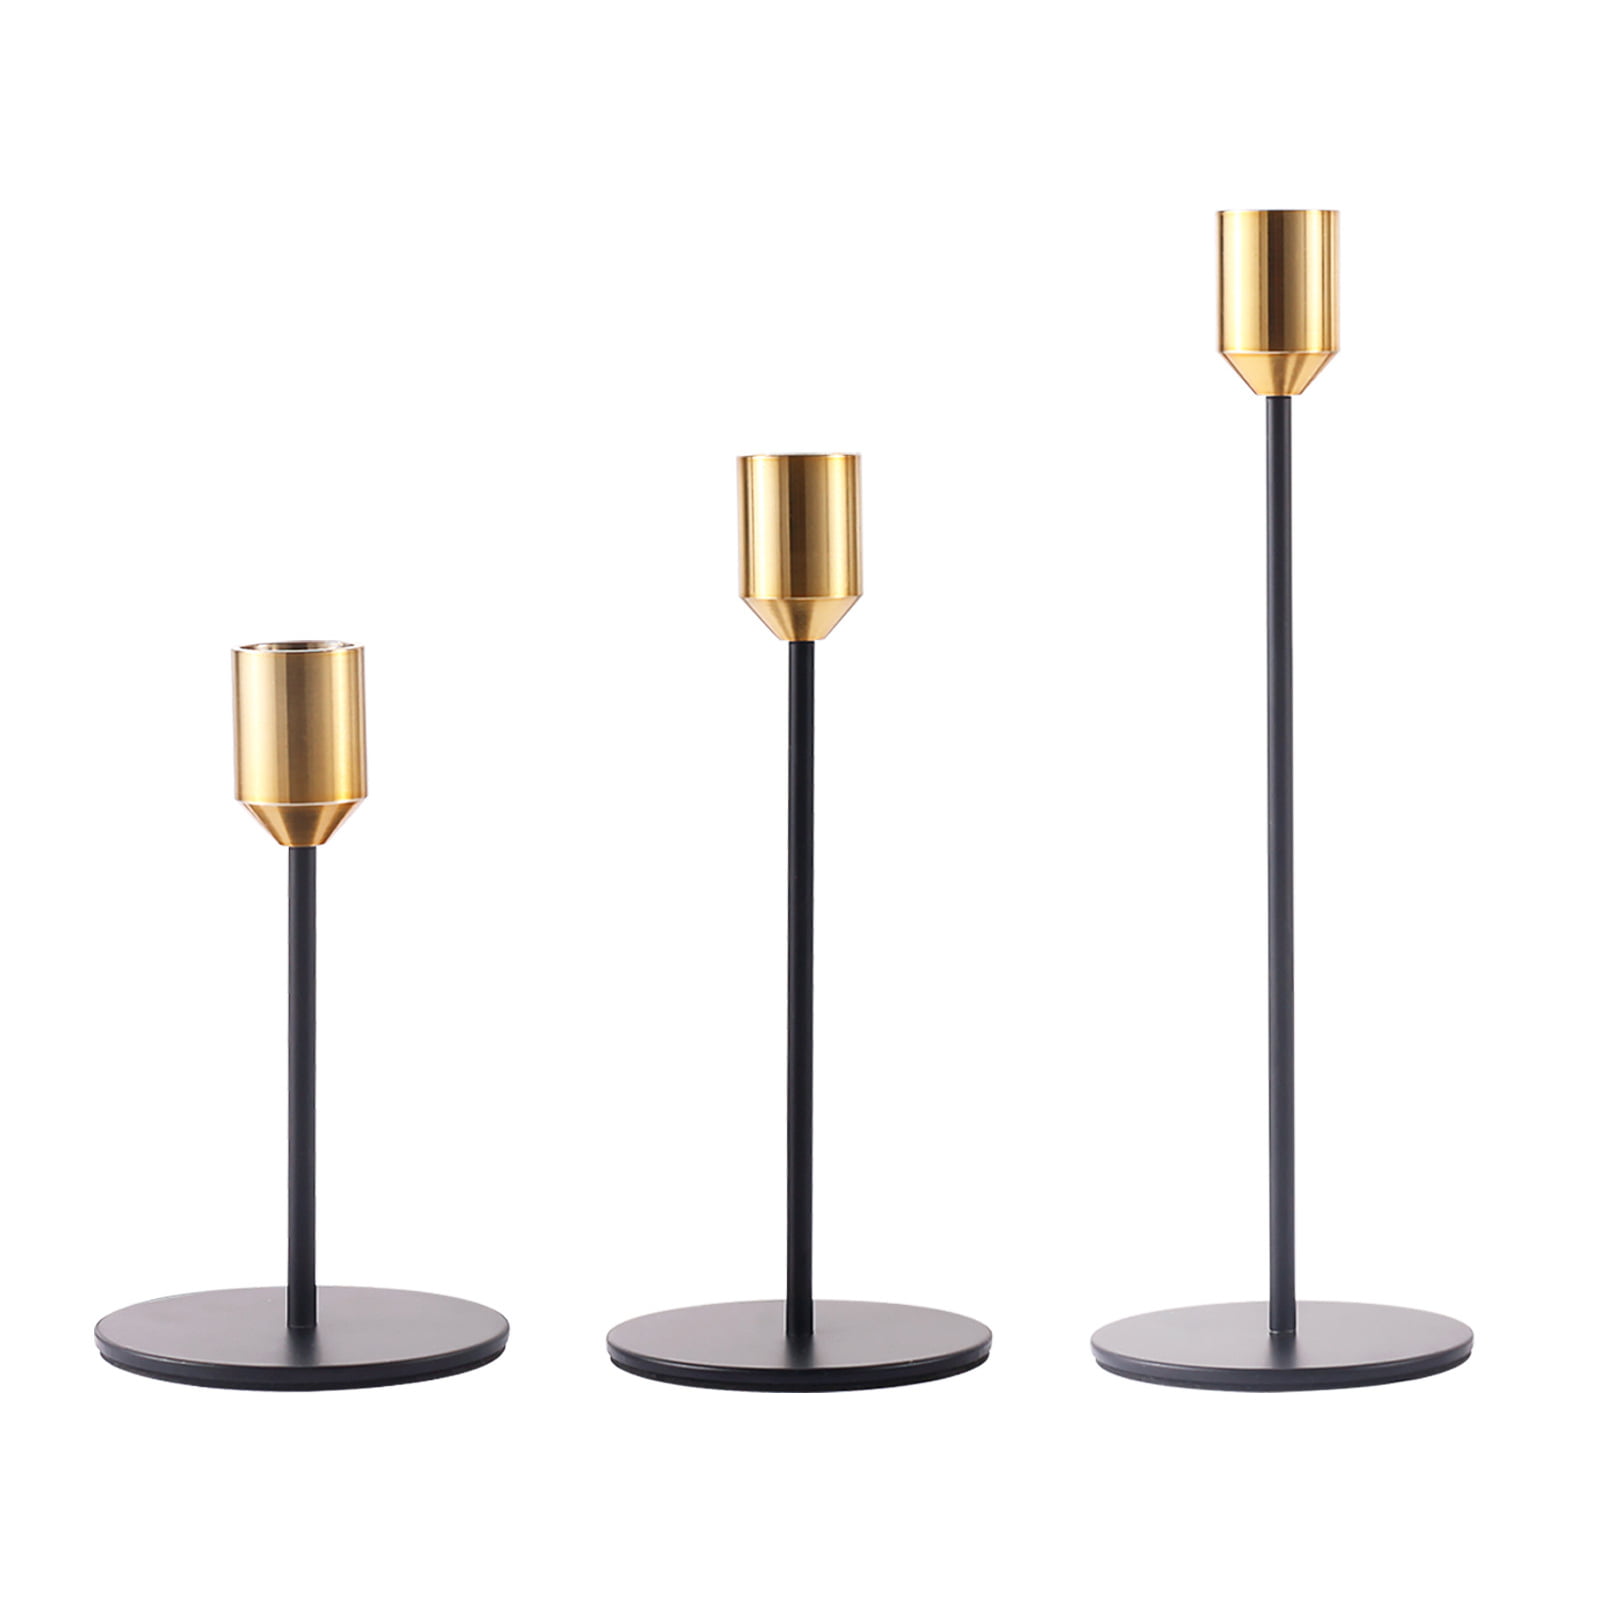 Gold Barbed Candlestick Holders 8cm Retro Candle Holder for Christmas Decoration Dining Table Living Room Decorative Home Accessories Pillar Candle Holder 6 Set Metal Candle Holders